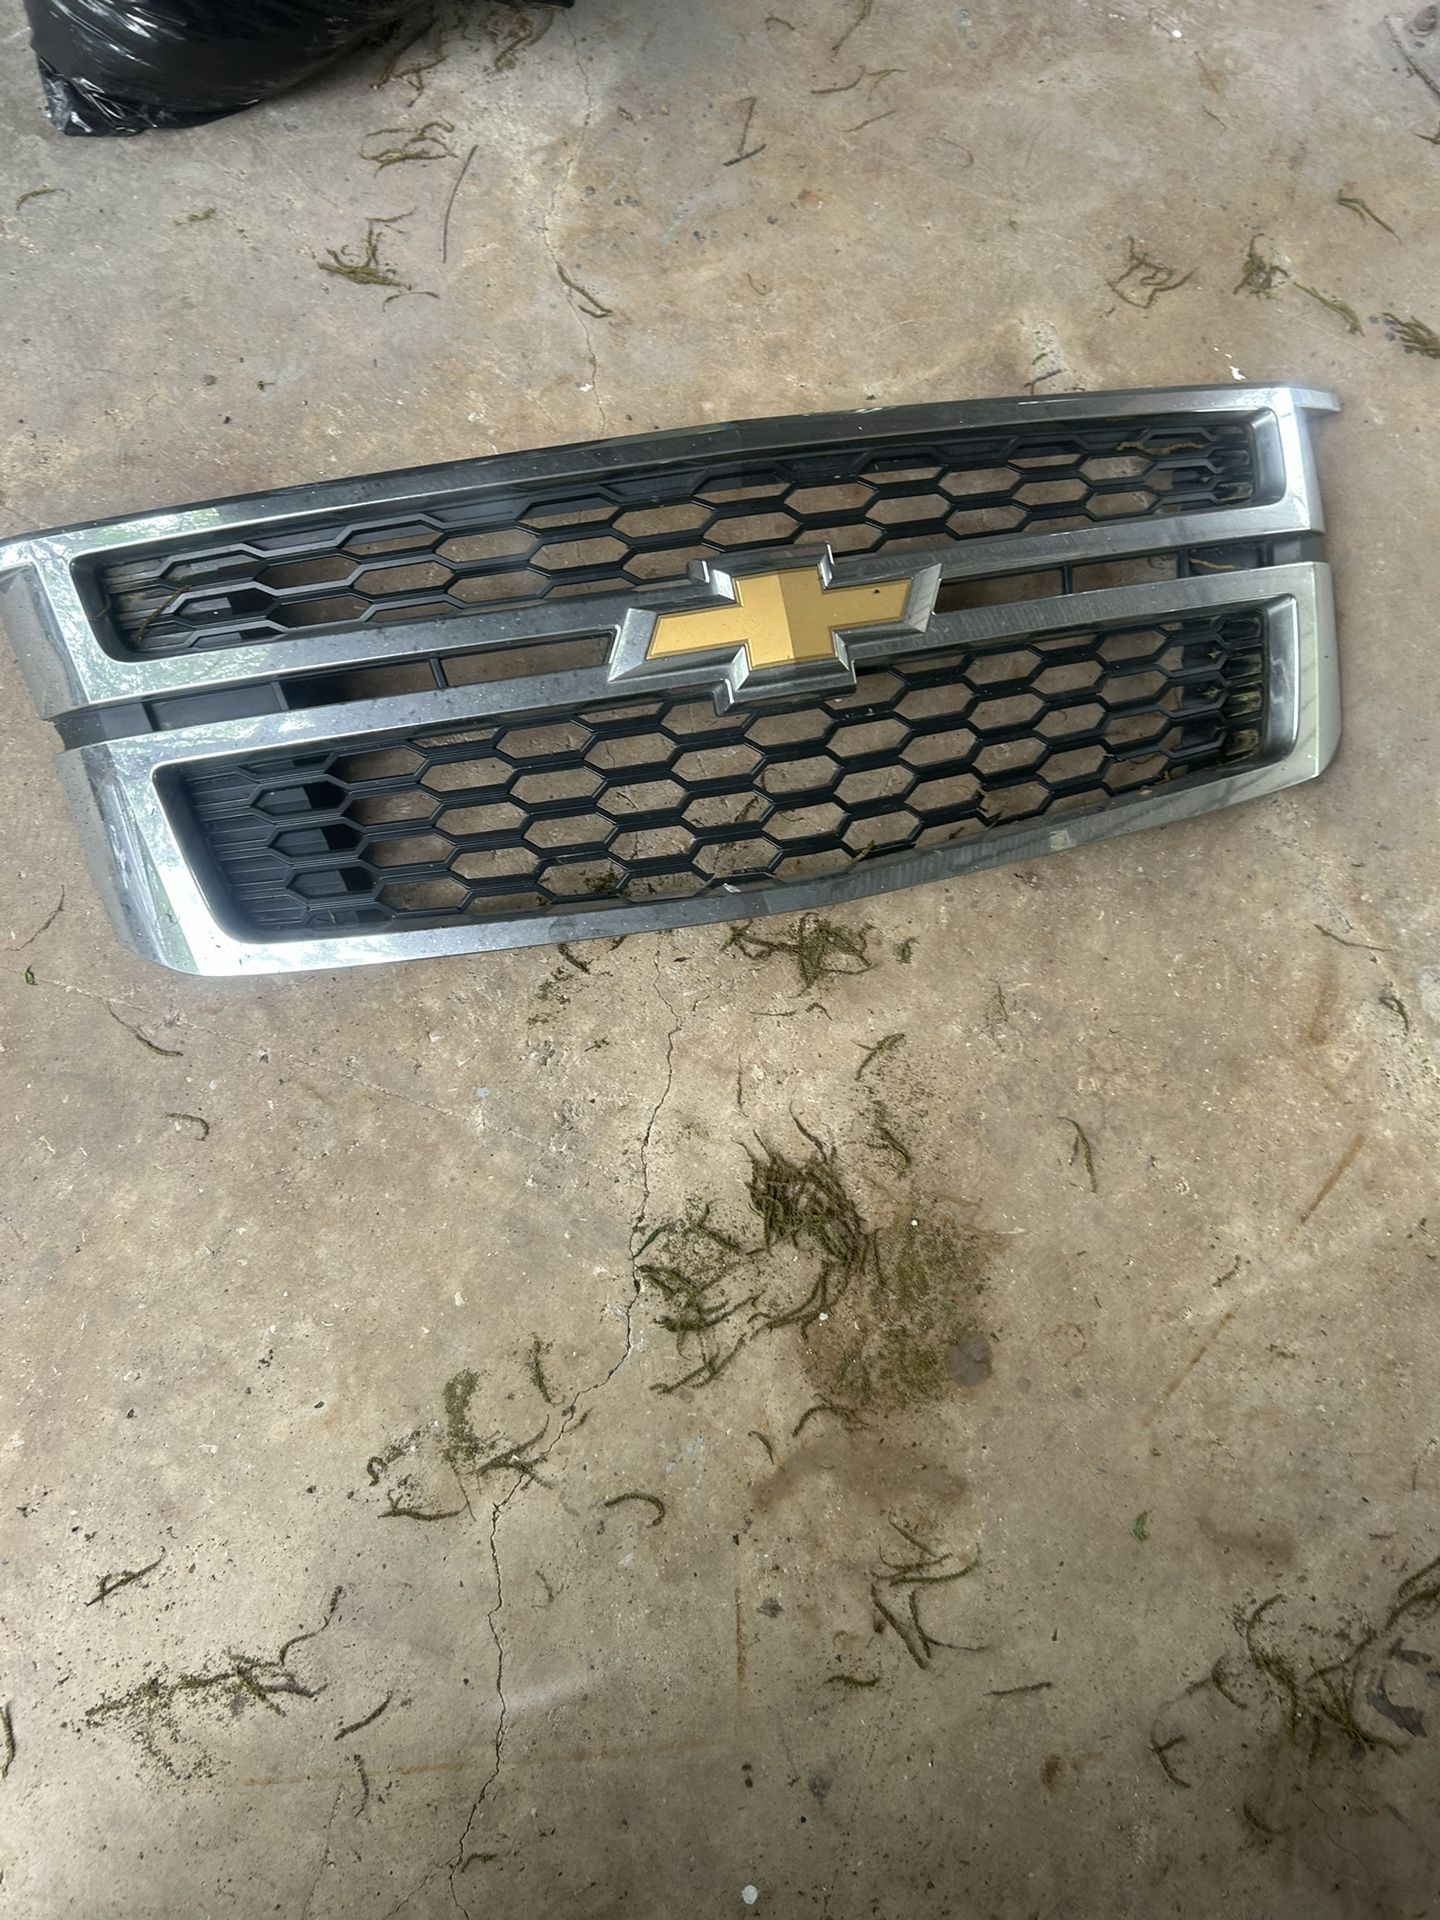 Stock Chevy grill Tahoe